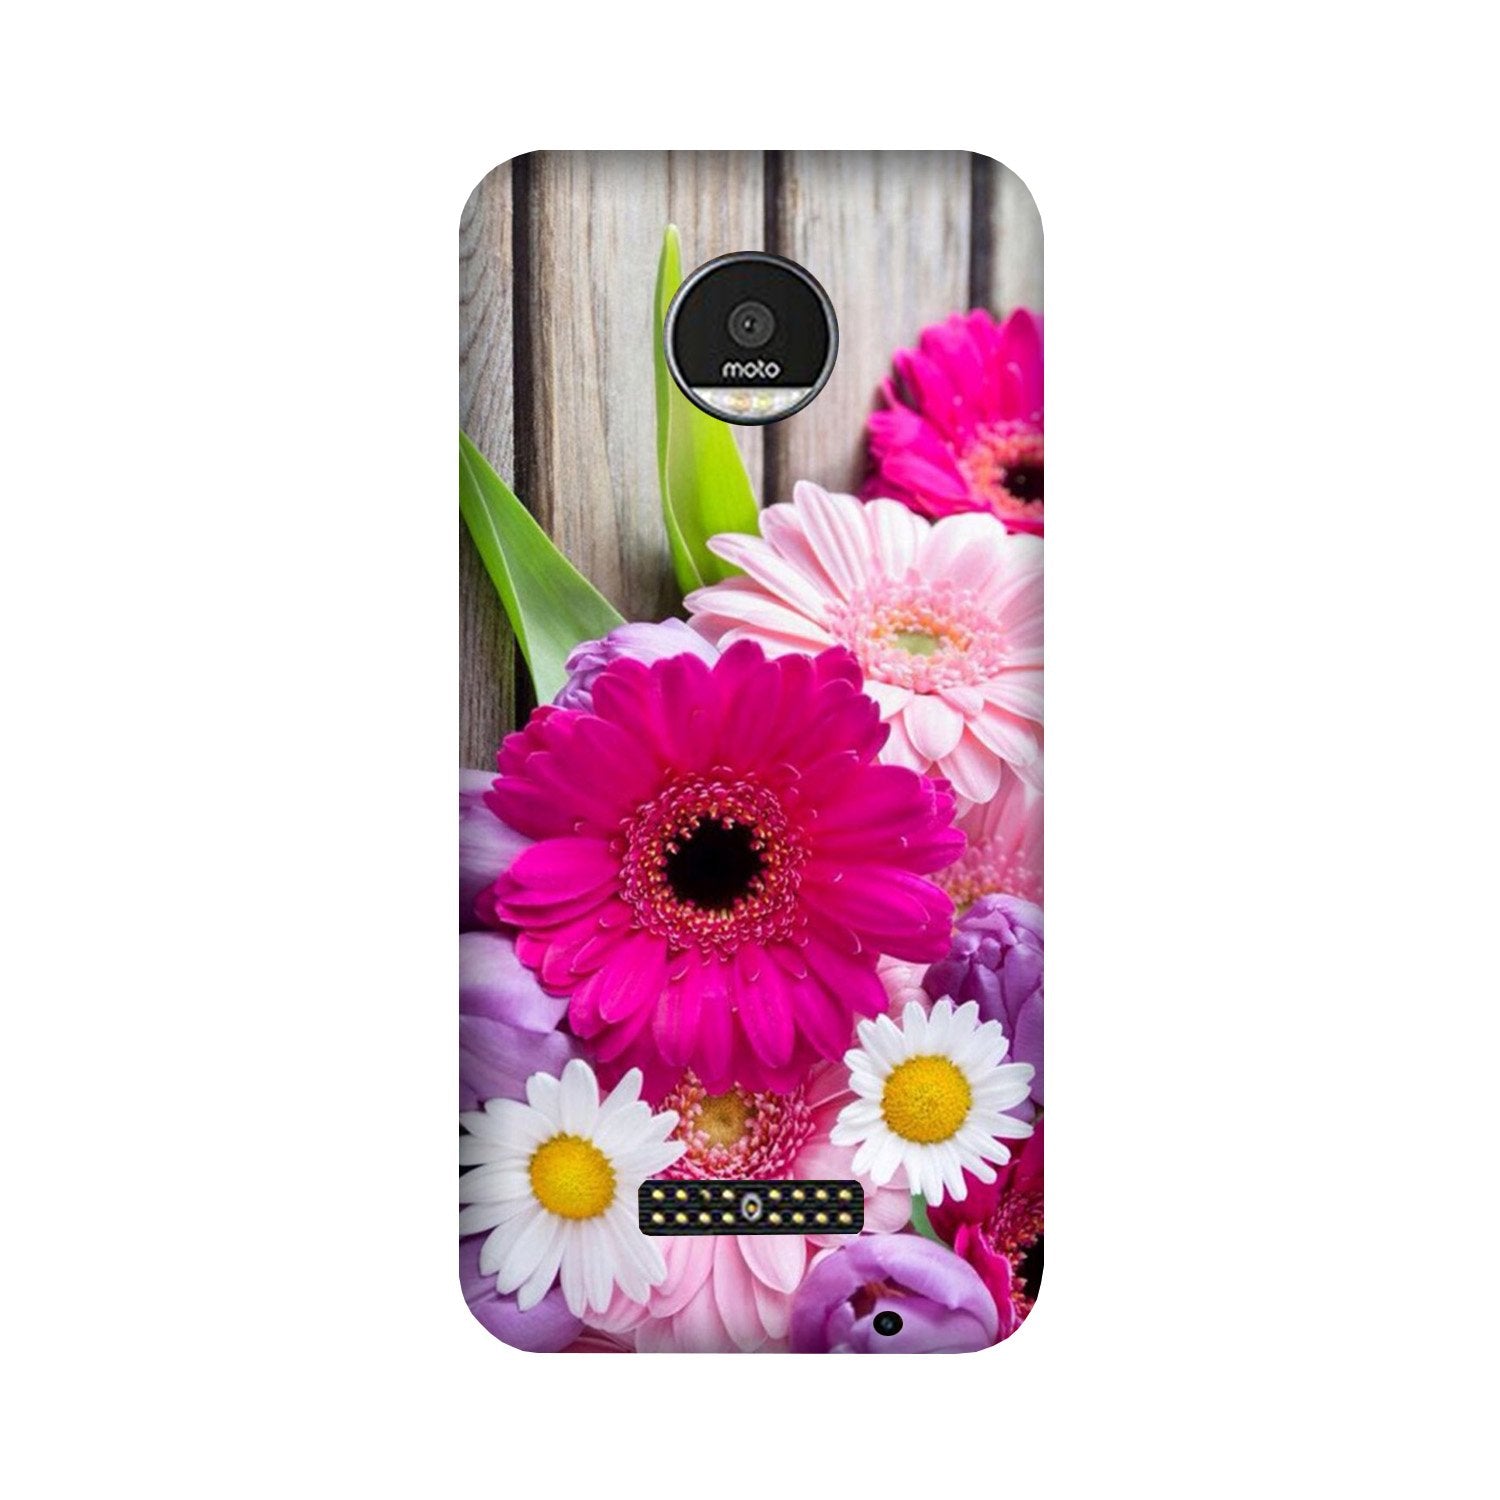 Coloful Daisy2 Case for Moto Z Play